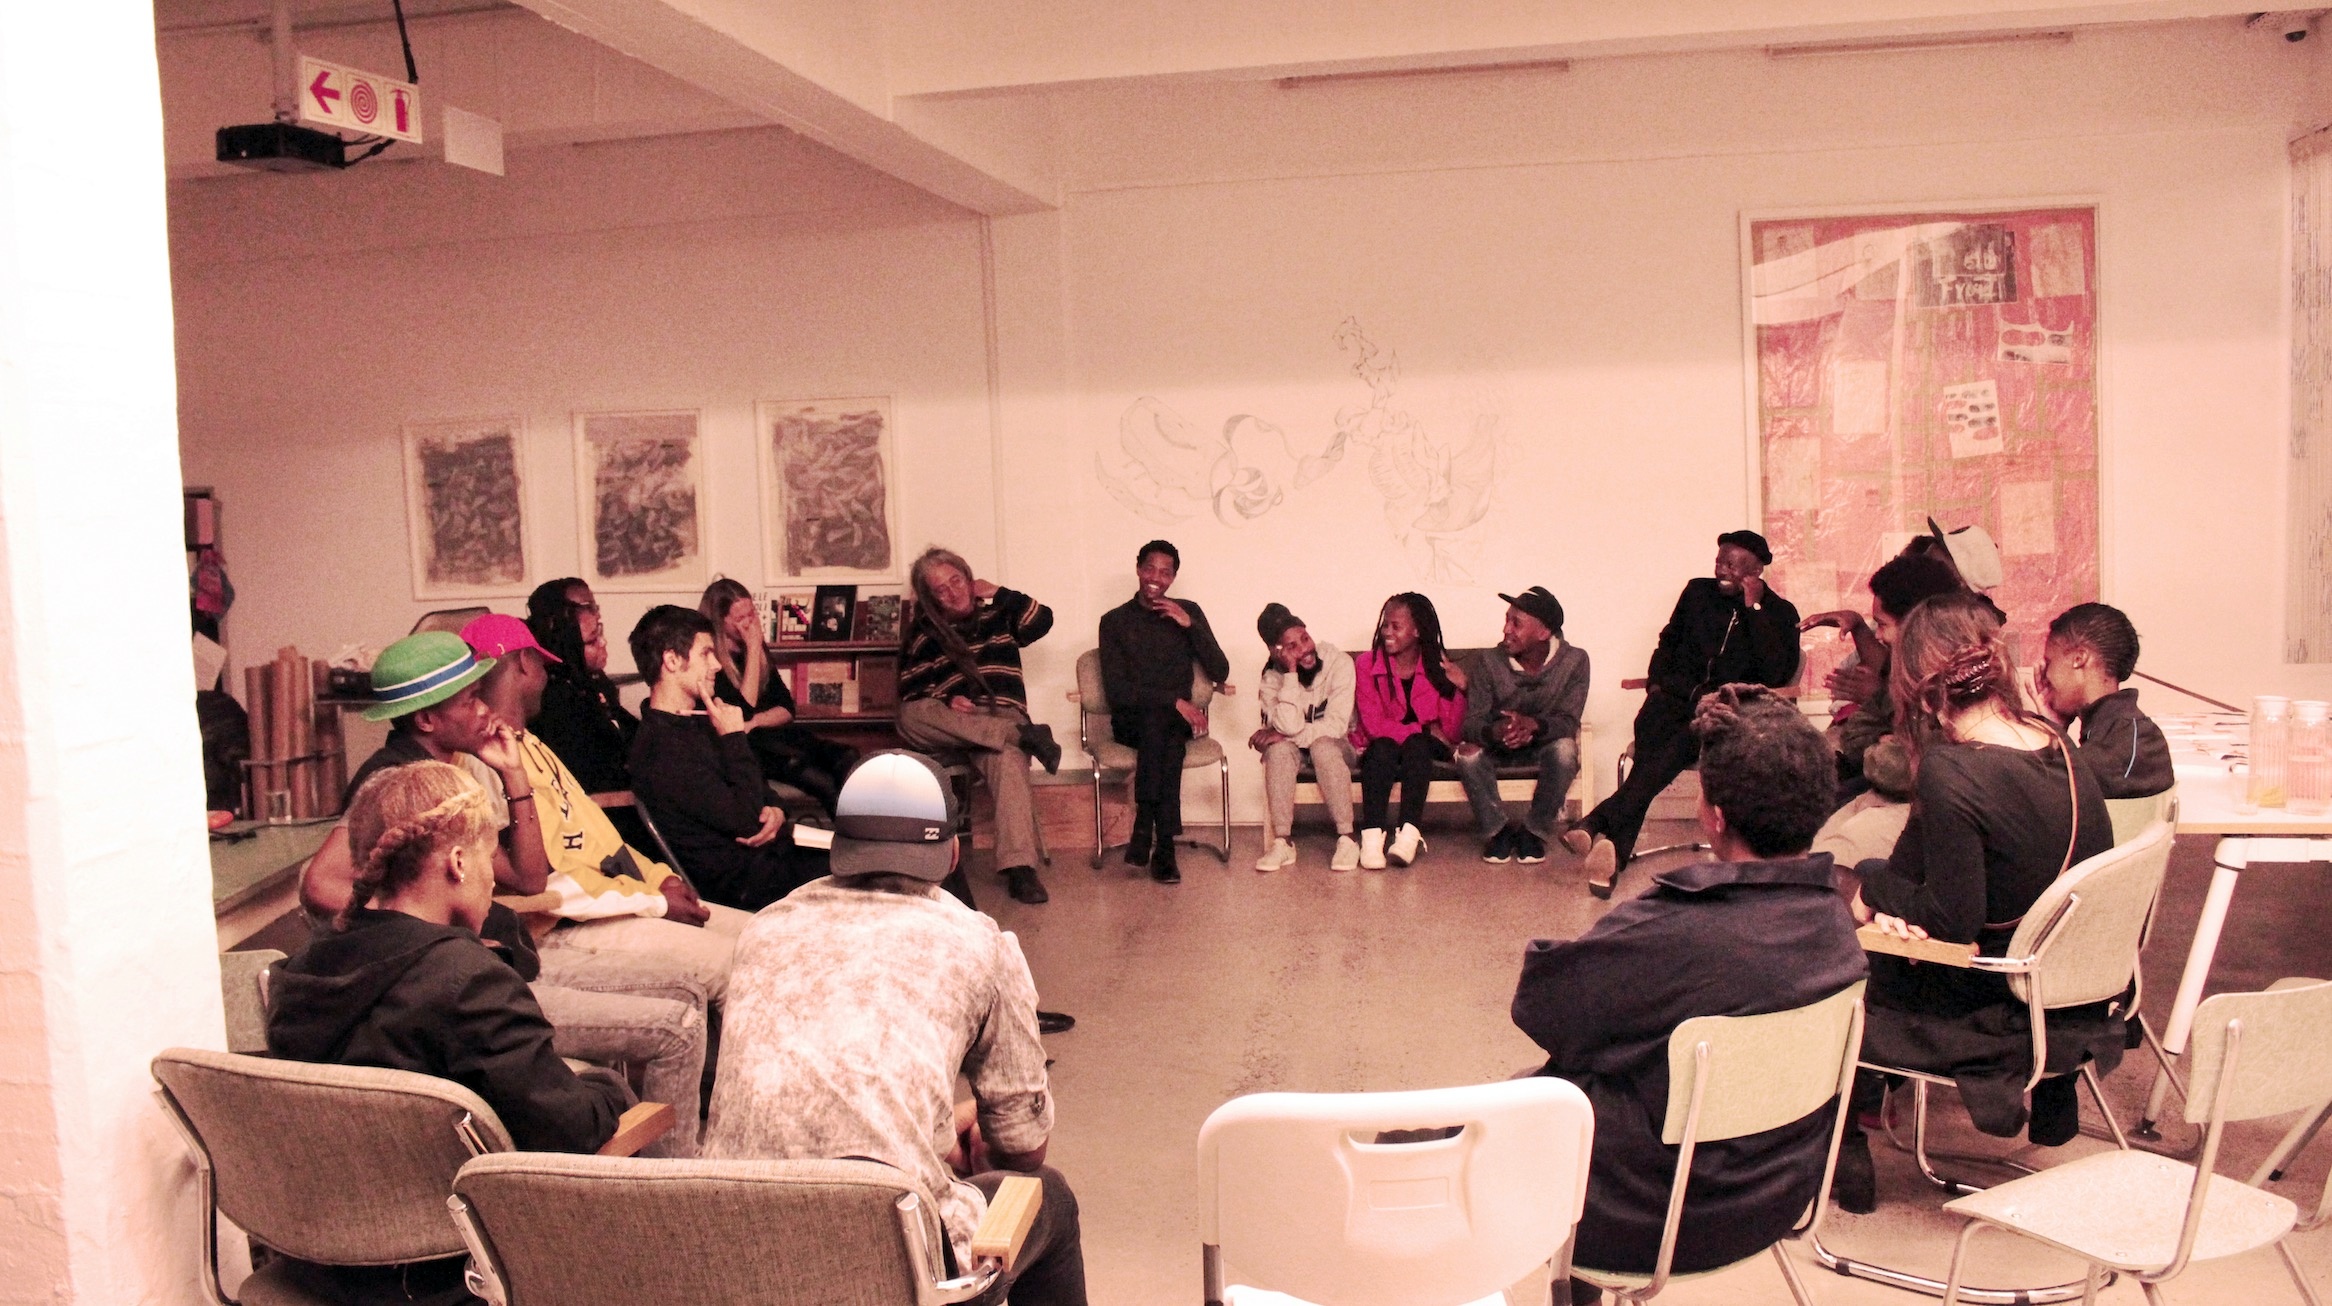 Monochrome event photograph from the ‘Creating in Circles’ exchange on A4’s ground floor. At the front, the facilitator Eugene Paramoer seated along with participants in a circular formation. At the back, Nolan Oswald Dennis’ mixed media drawings ‘abangenamalihlaba IV-VI’ and Moshekwa Langa’s mixed media work ‘Ramothibedi’ are mounted on the wall, with a drawing on the wall between them.
